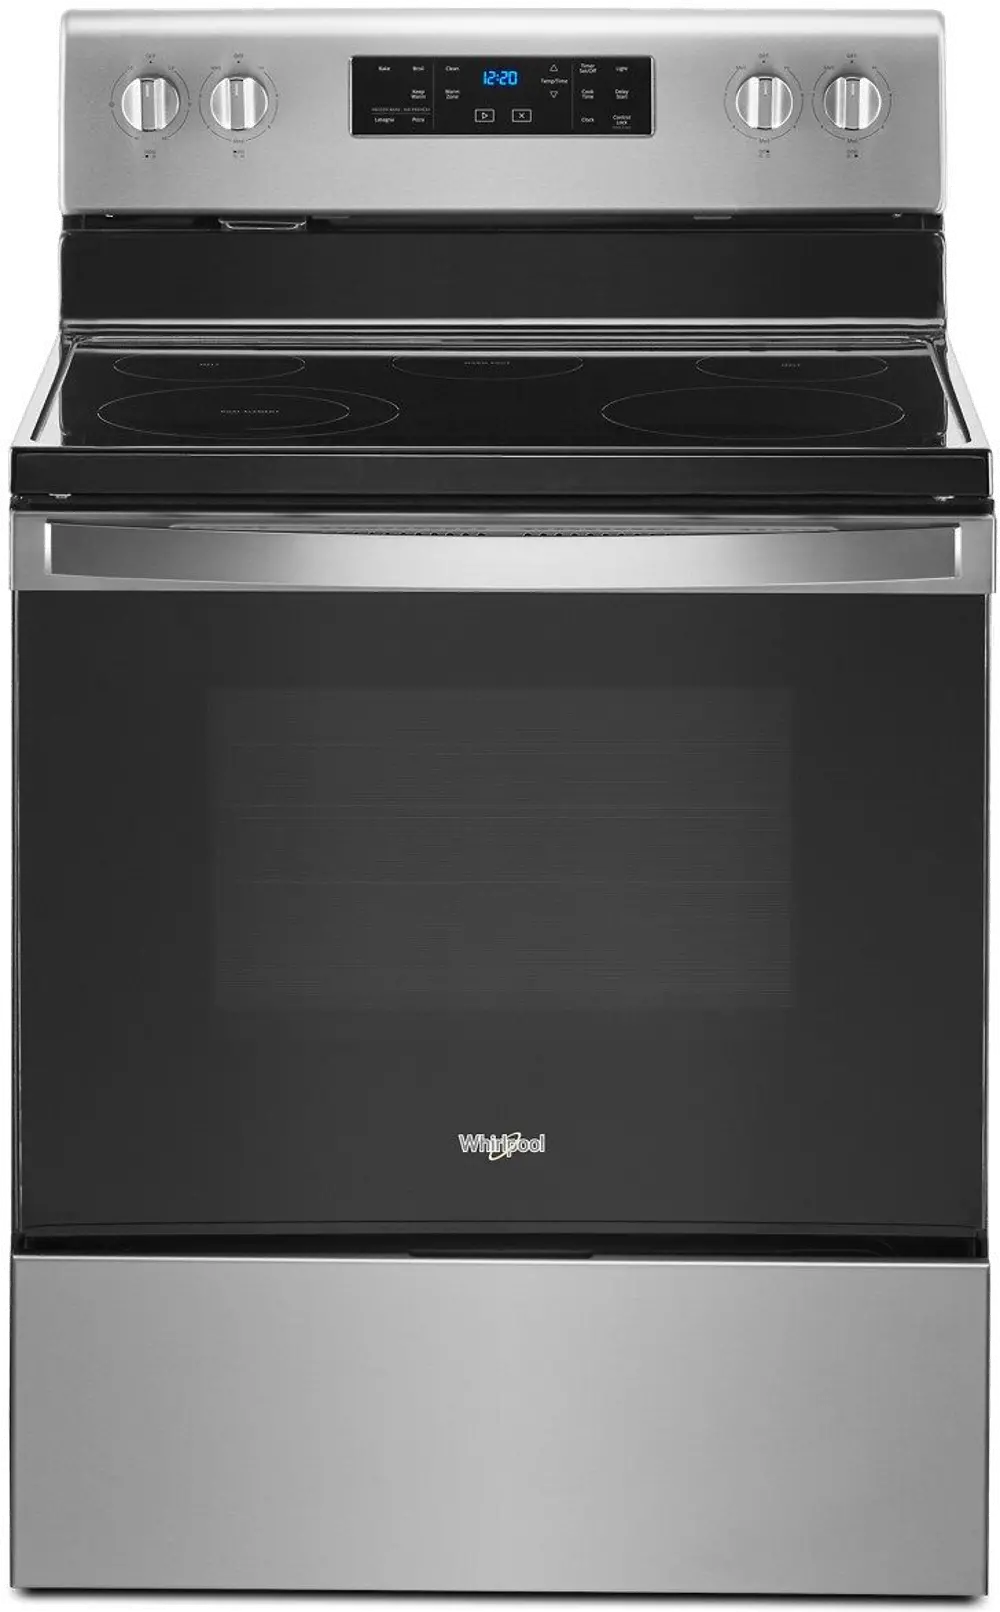 WFE525S0JZ Whirlpool 5.3 cu. ft. Electric Range - 30 Inch Stainless Steel-1